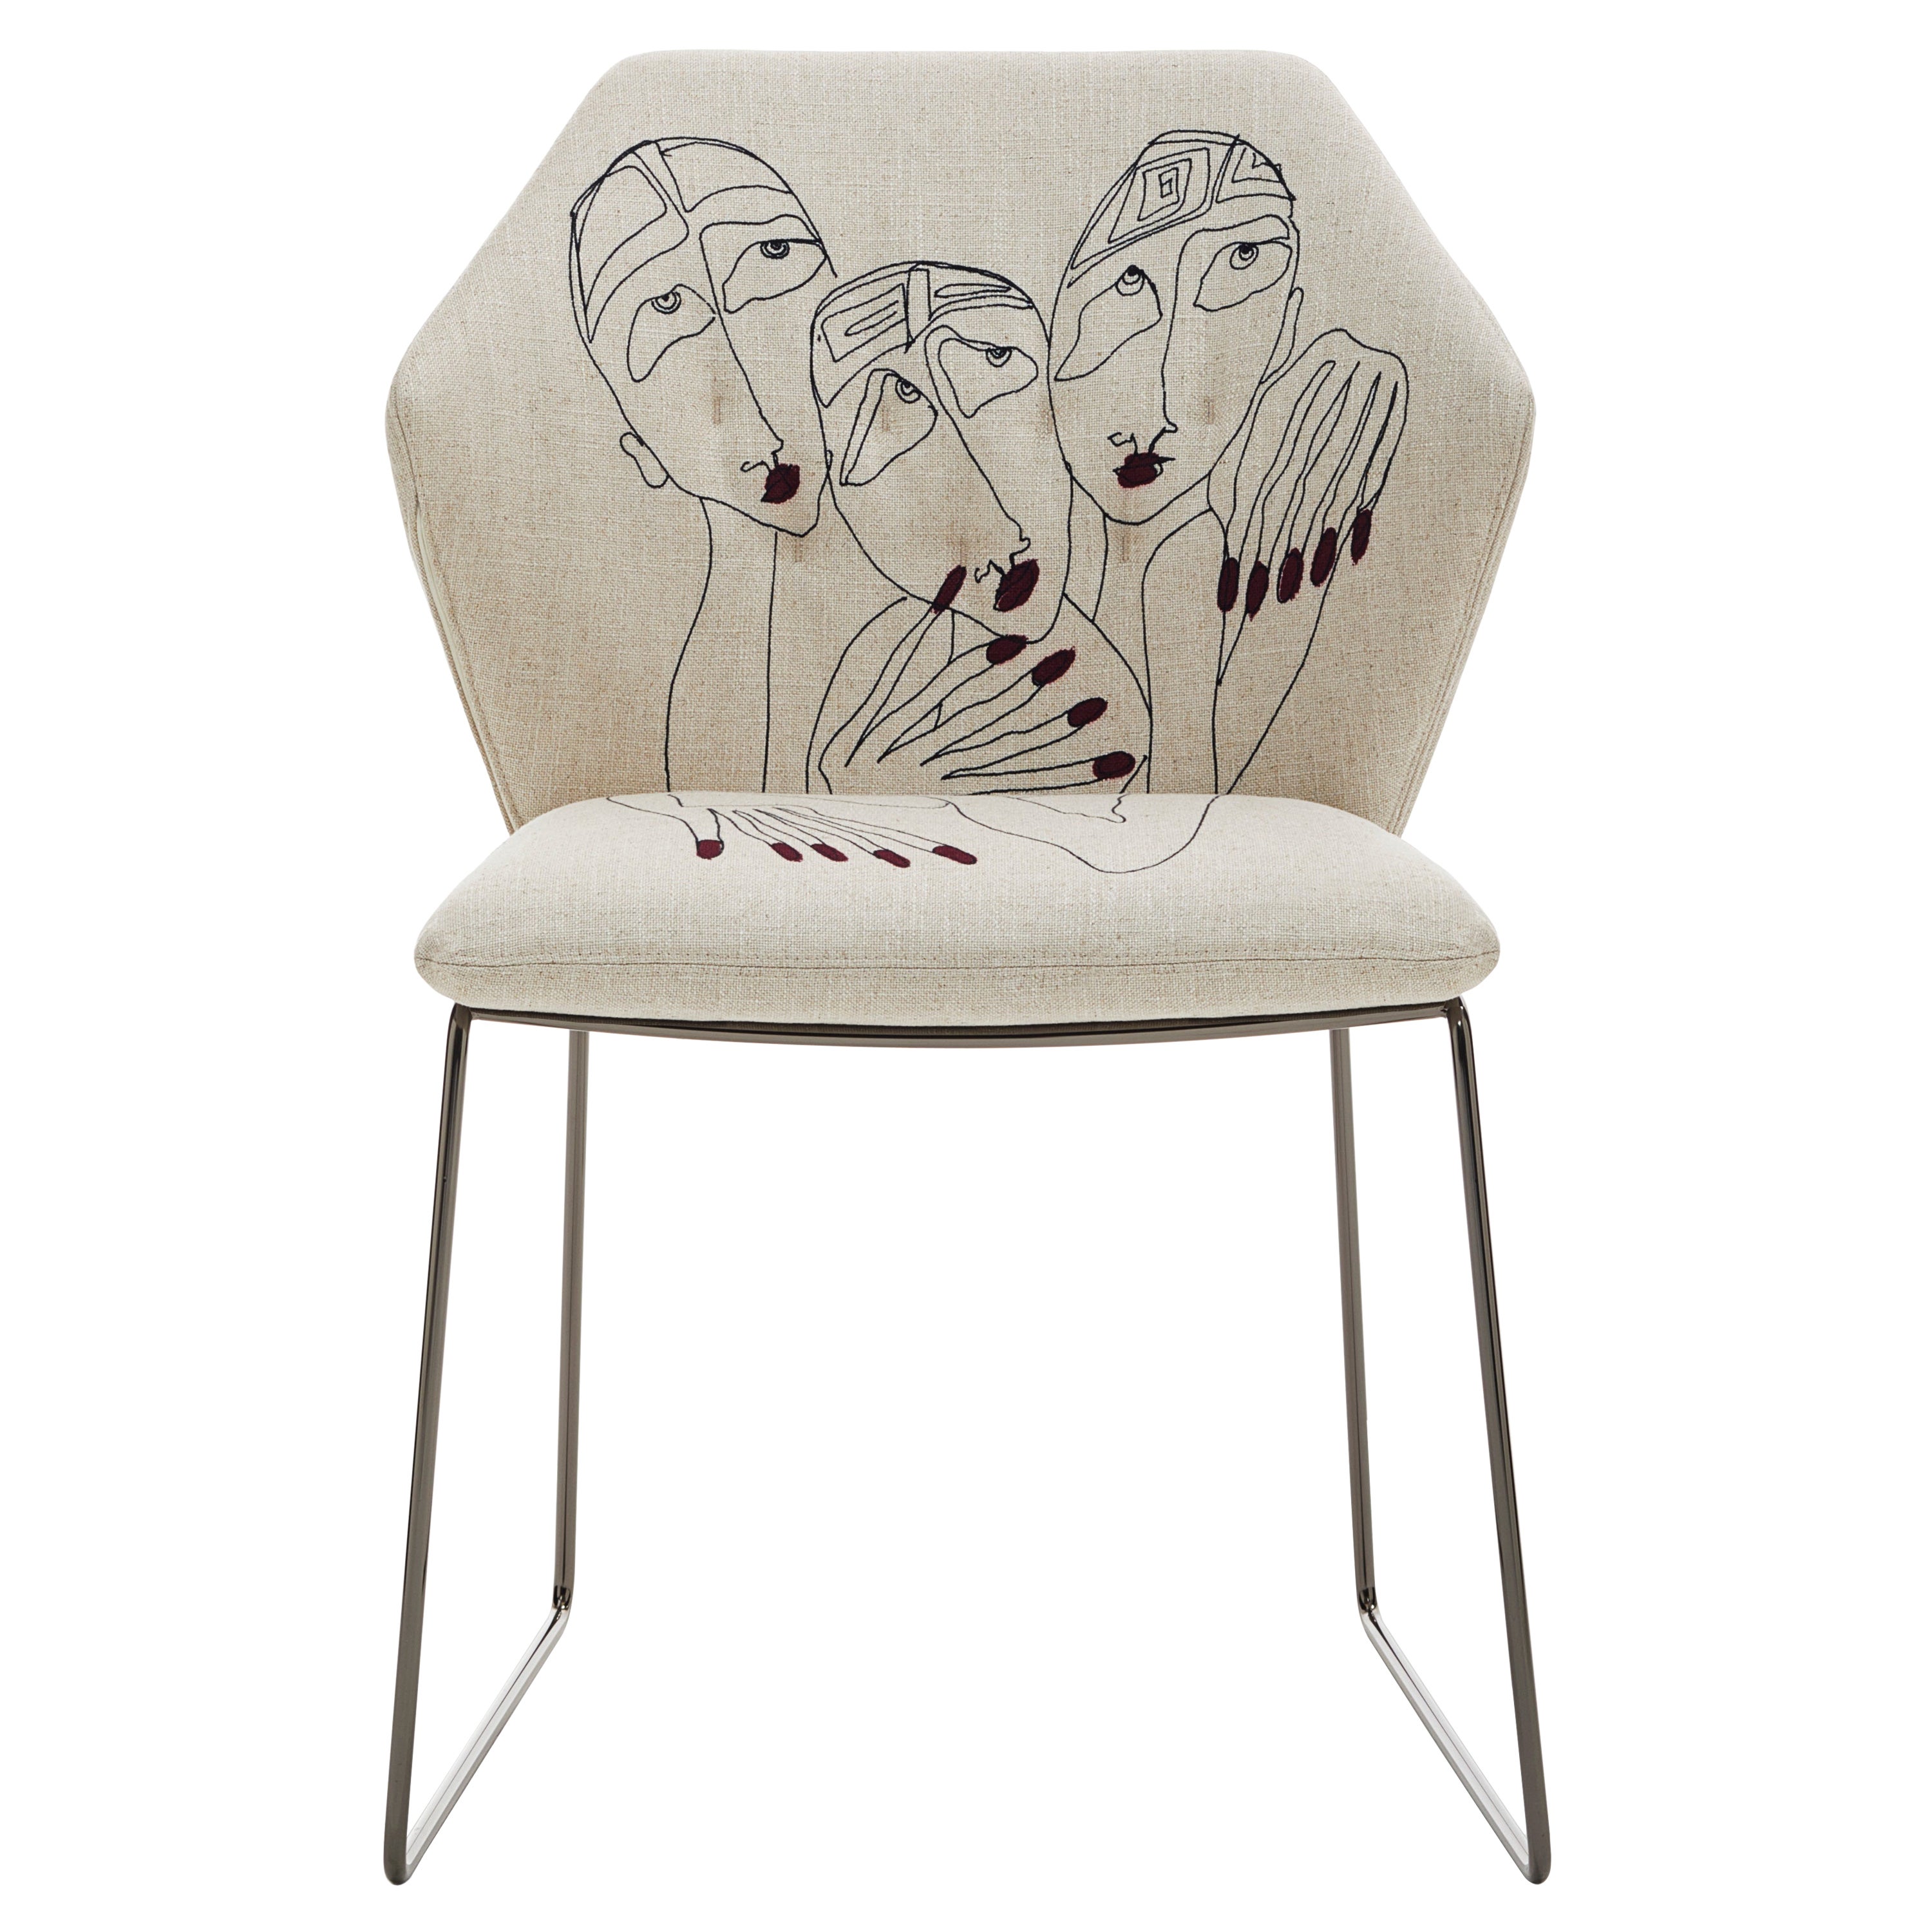 New York Chair 2 by Marras in Beige Upholstery & Nickel Legs by Sergio Bicego For Sale